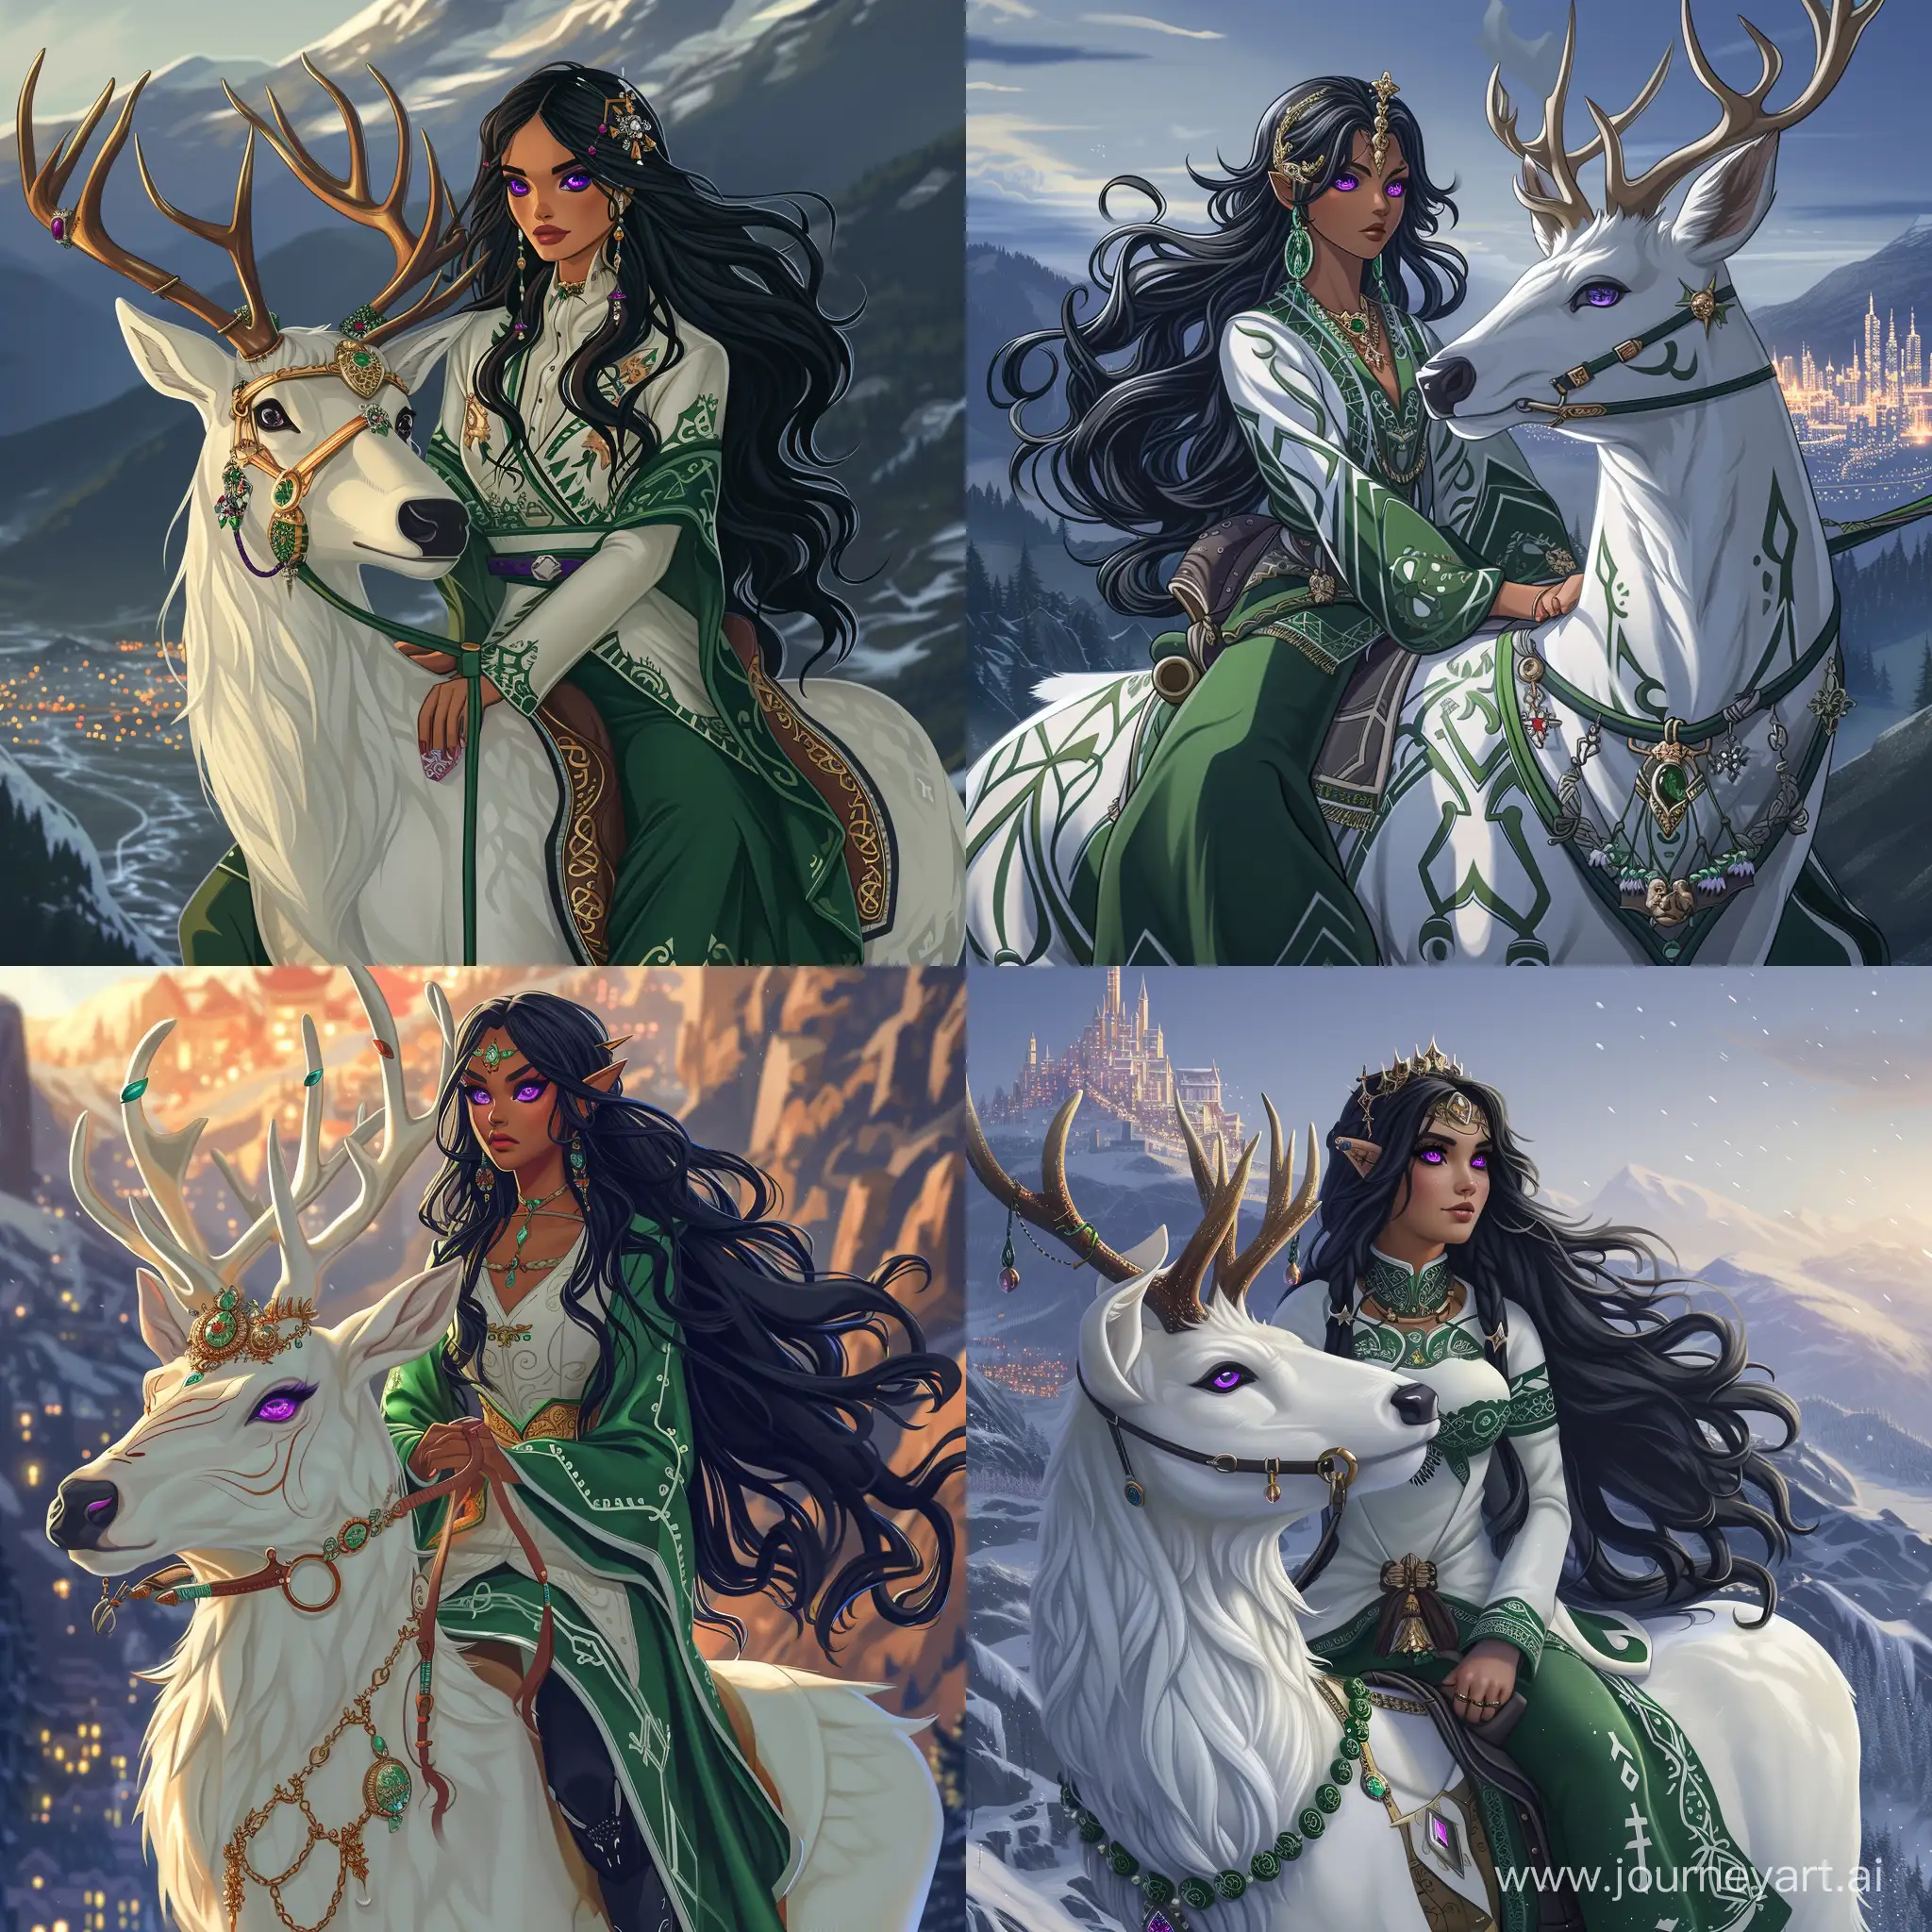 A black wavy haired handsome huntress with bright violet eyes sits sublimely on a white noble stag decorated in Nordic style. Her long hair blows in the gentle wind as she sits enthroned on the proud animal with skillful elegance in her green-white hunter's robe. The stag, magnificently decorated with Nordic ornaments, wears the bridle with dignity. Together they look out over the sparkling city from the mountainside, their presence combining the raw beauty of nature with the majesty of civilization, in cartoon style, high quality details, 